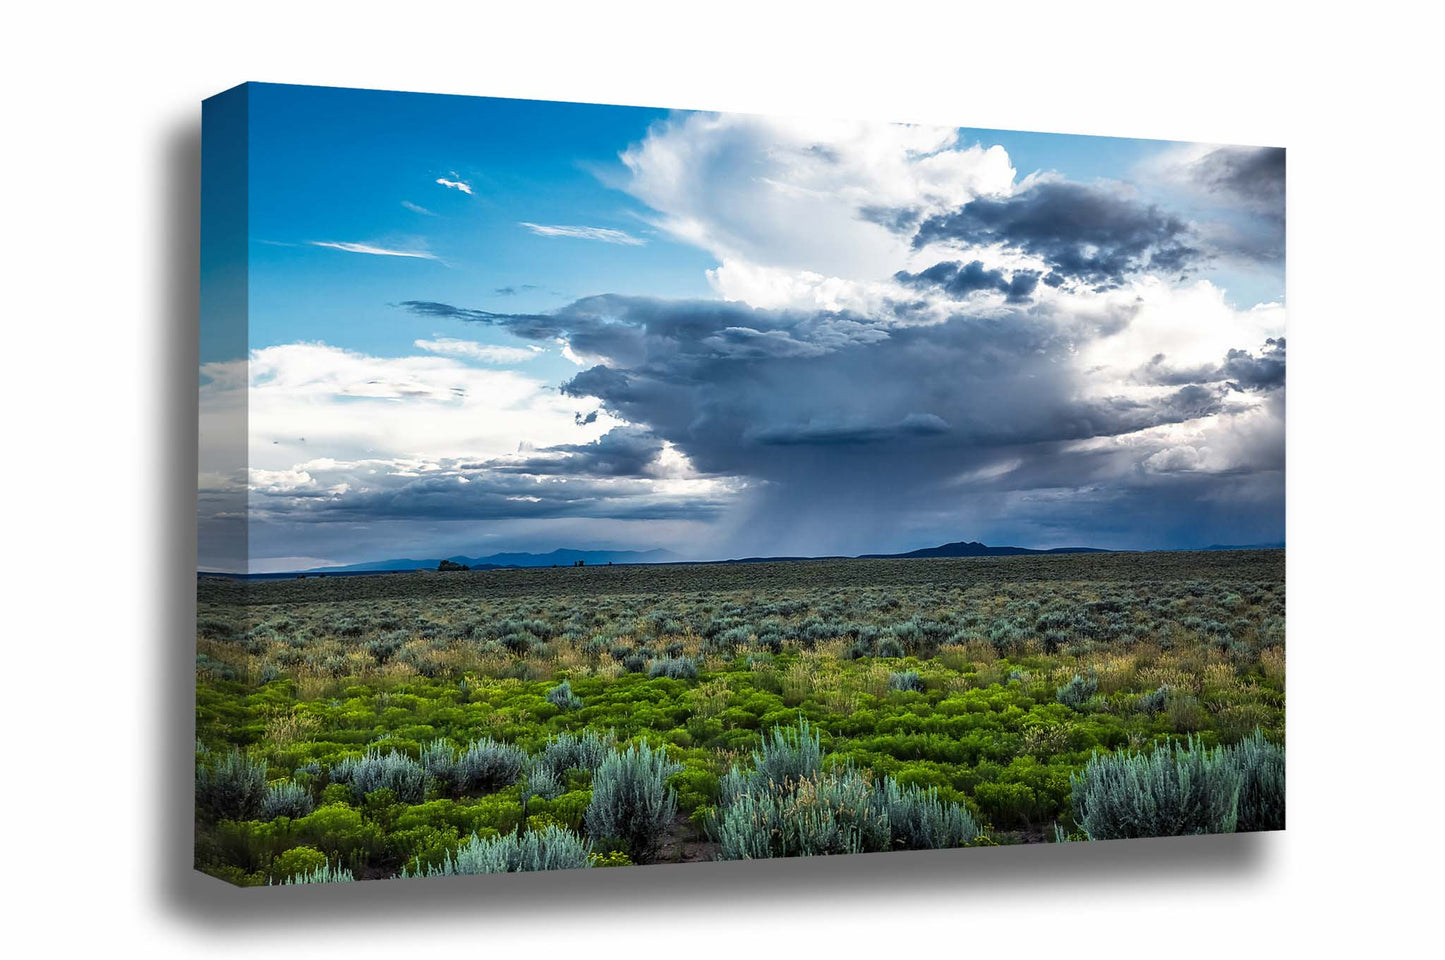 High desert canvas wall art of a monsoon thunderstorm over sagebrush on a stormy day near Taos, New Mexico by Sean Ramsey of Southern Plains Photography.